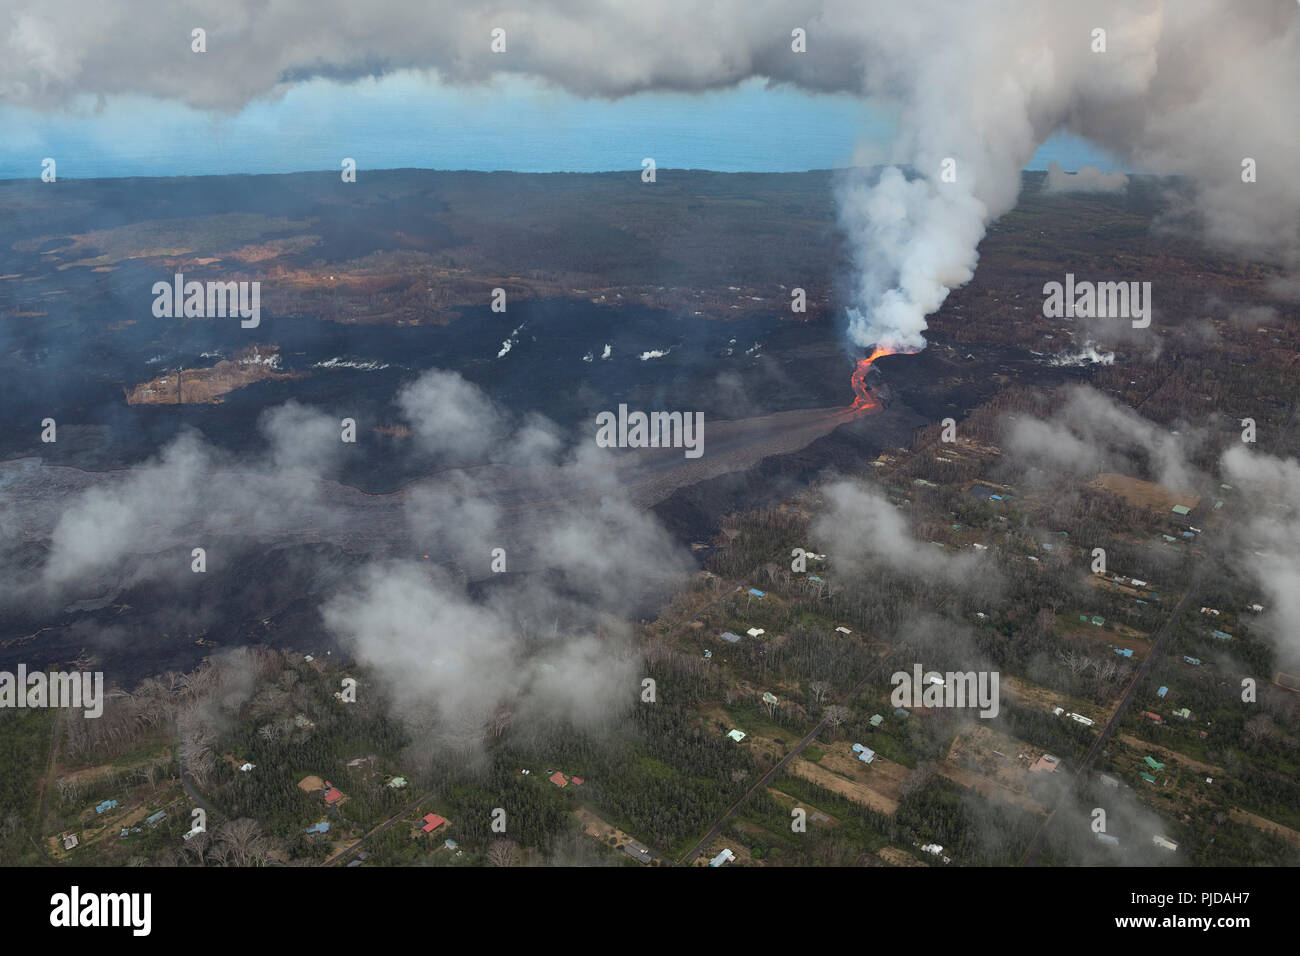 Aerial view of Kilauea Volcano east rift zone erupting hot lava from Fissure 8 in the Leilani Estates residential subdivision near Pahoa, Hawaii Stock Photo